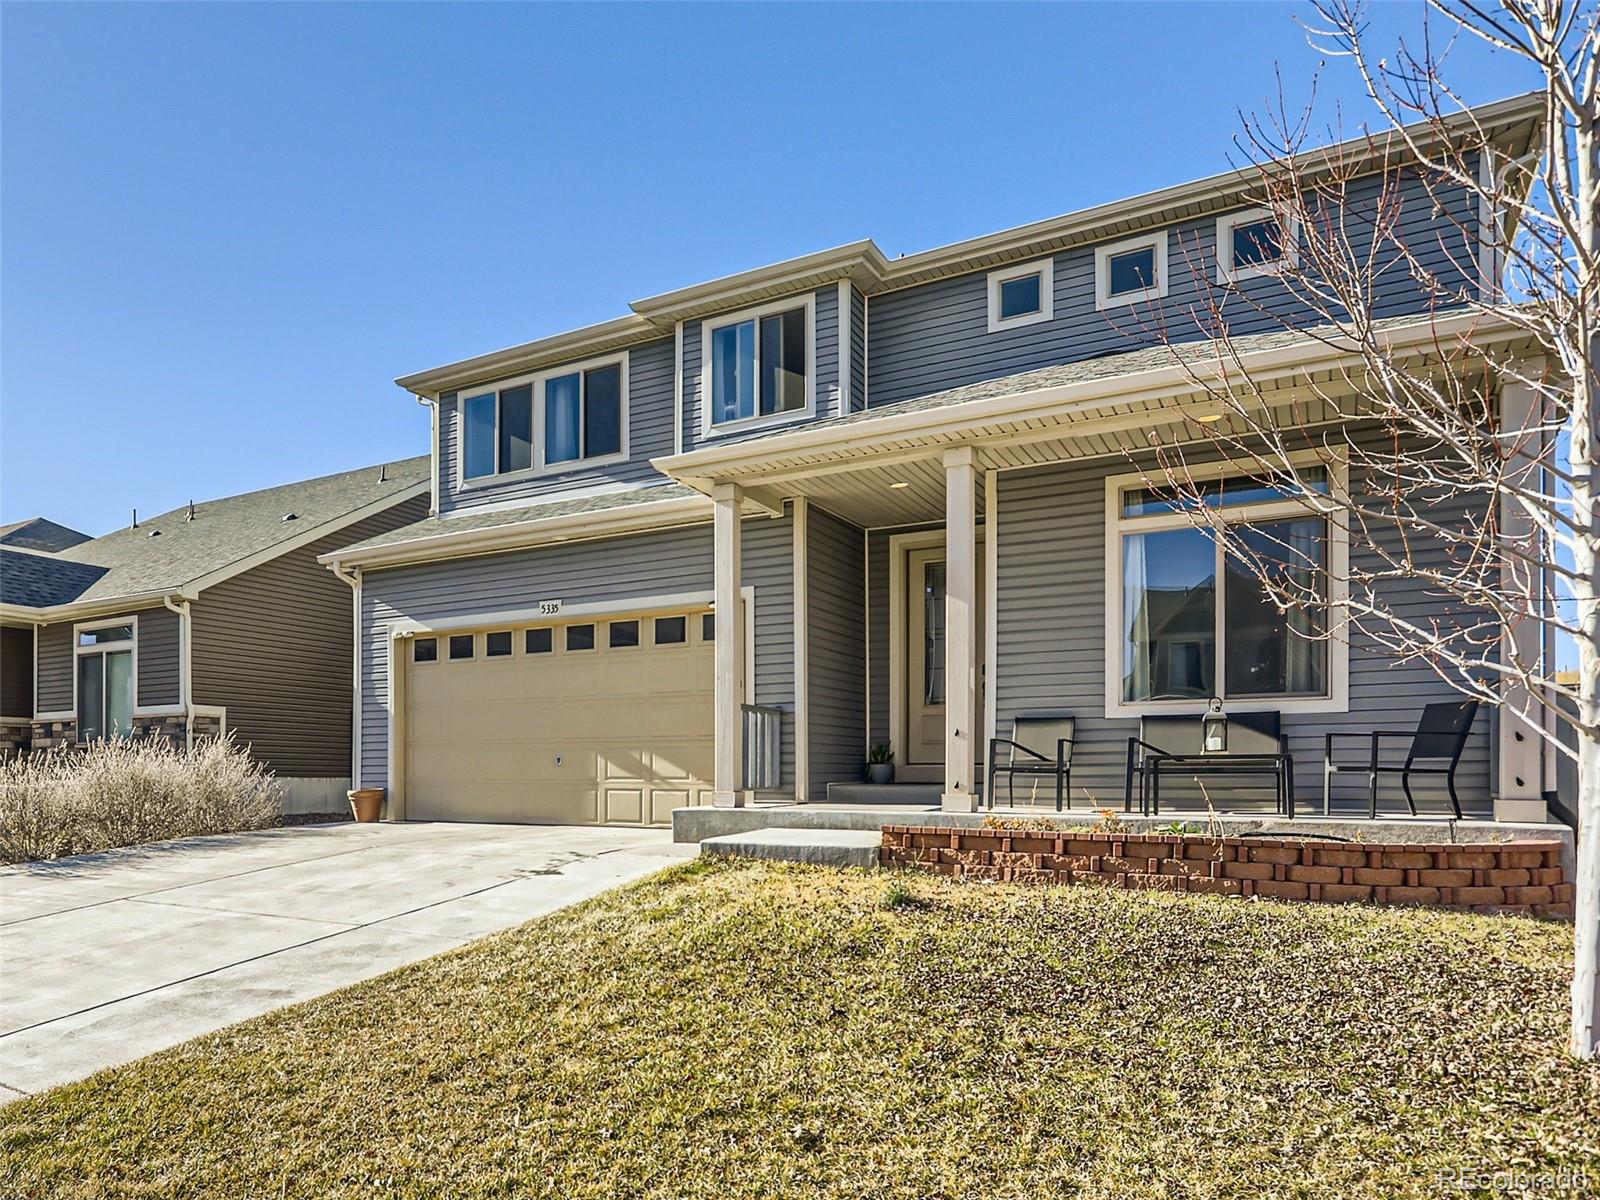 5335  truckee street, denver sold home. Closed on 2024-01-12 for $639,000.